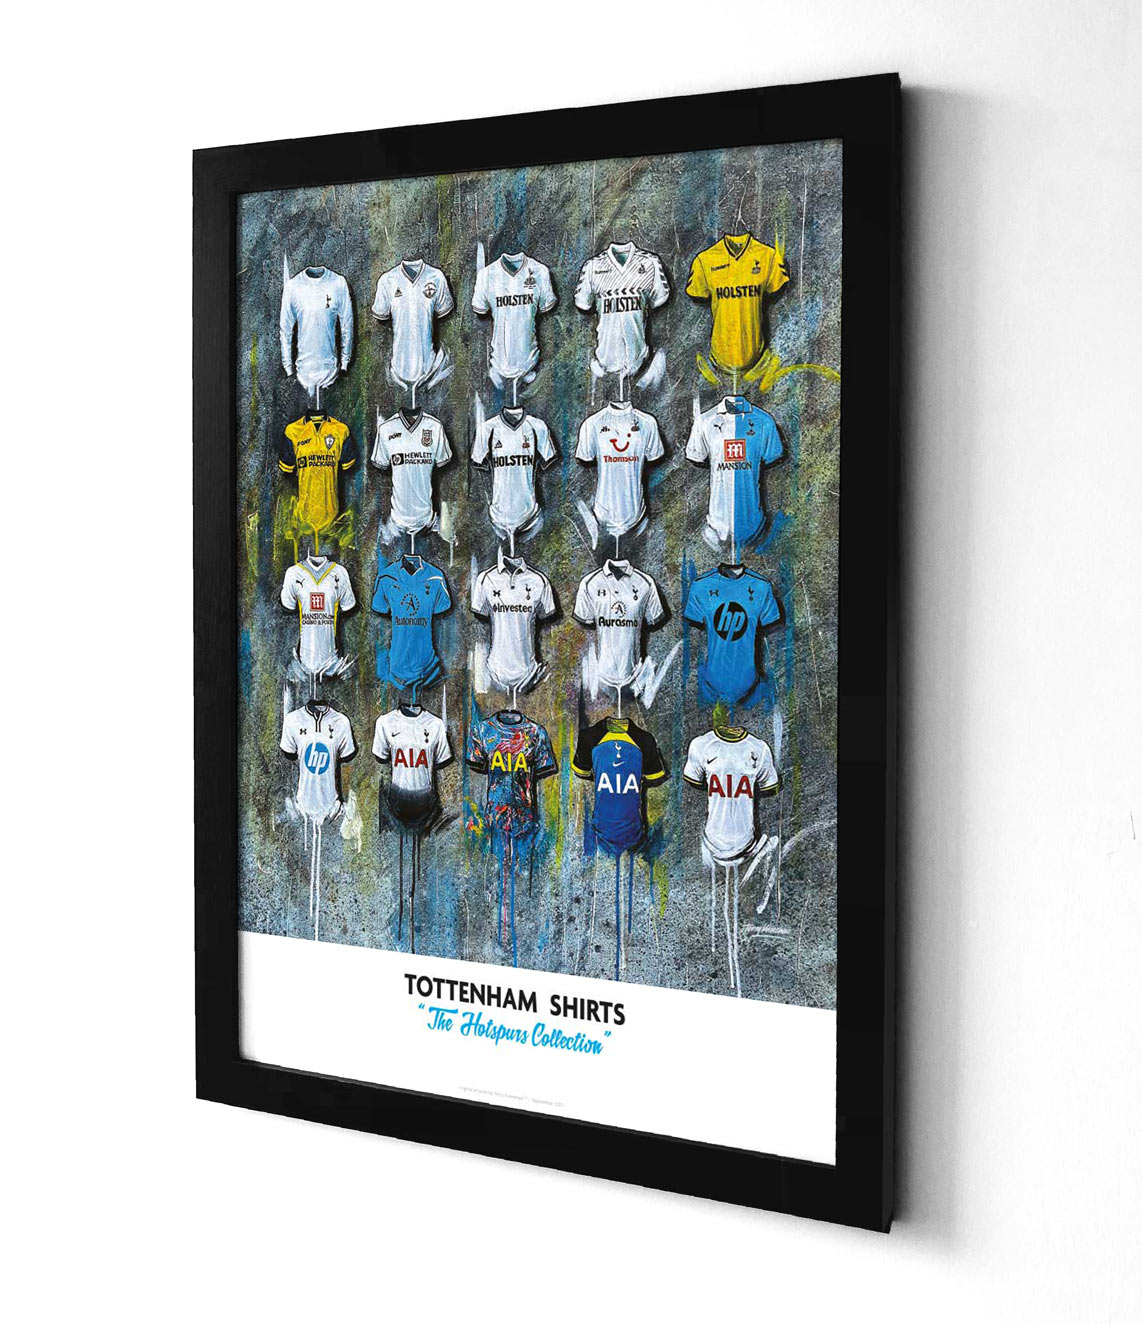 This is a personalised A2 limited edition print artwork by Terry Kneeshaw featuring 20 iconic Tottenham Hotspur team shirts. The artwork showcases the club's kits from past seasons and includes designs from the current 2022 season. Each shirt is unique and recognisable, featuring the famous Tottenham Hotspur crest and colours. The print is a must-have for any Spurs fan or football enthusiast and is a stunning tribute to the club's rich history and legacy.